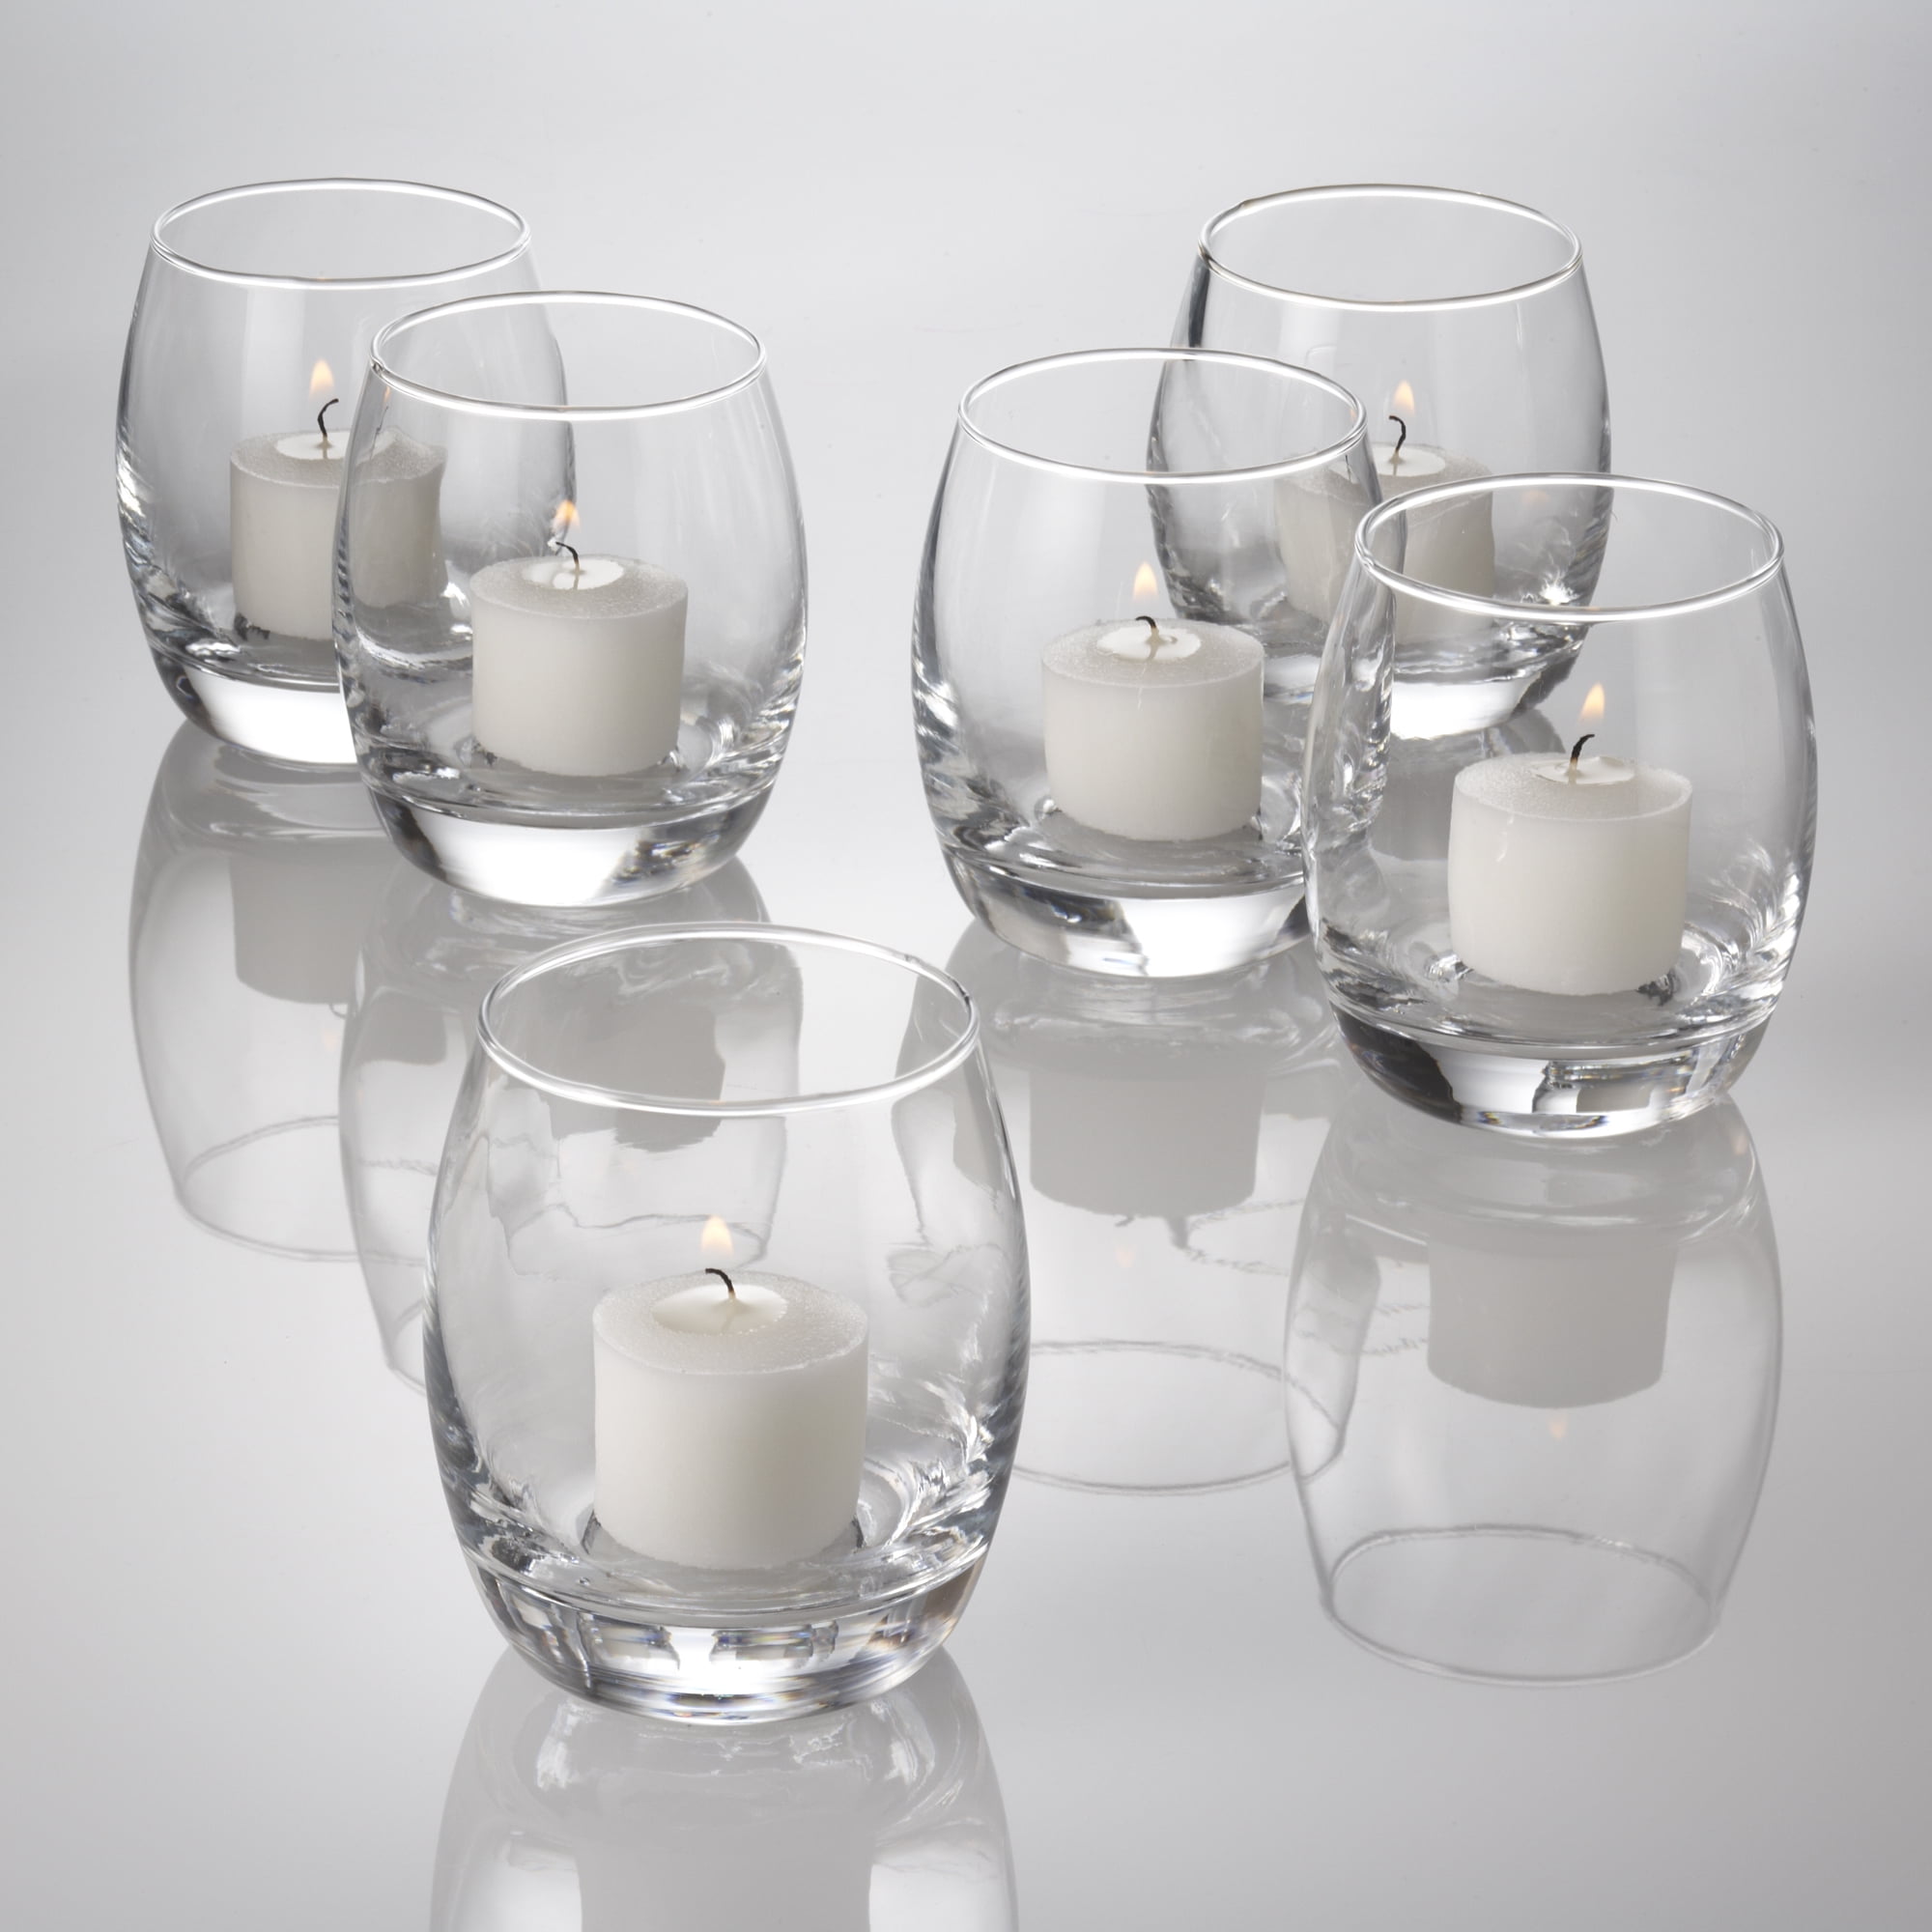 Set of 72 Votive Candles and 72 Glass Votive Holders